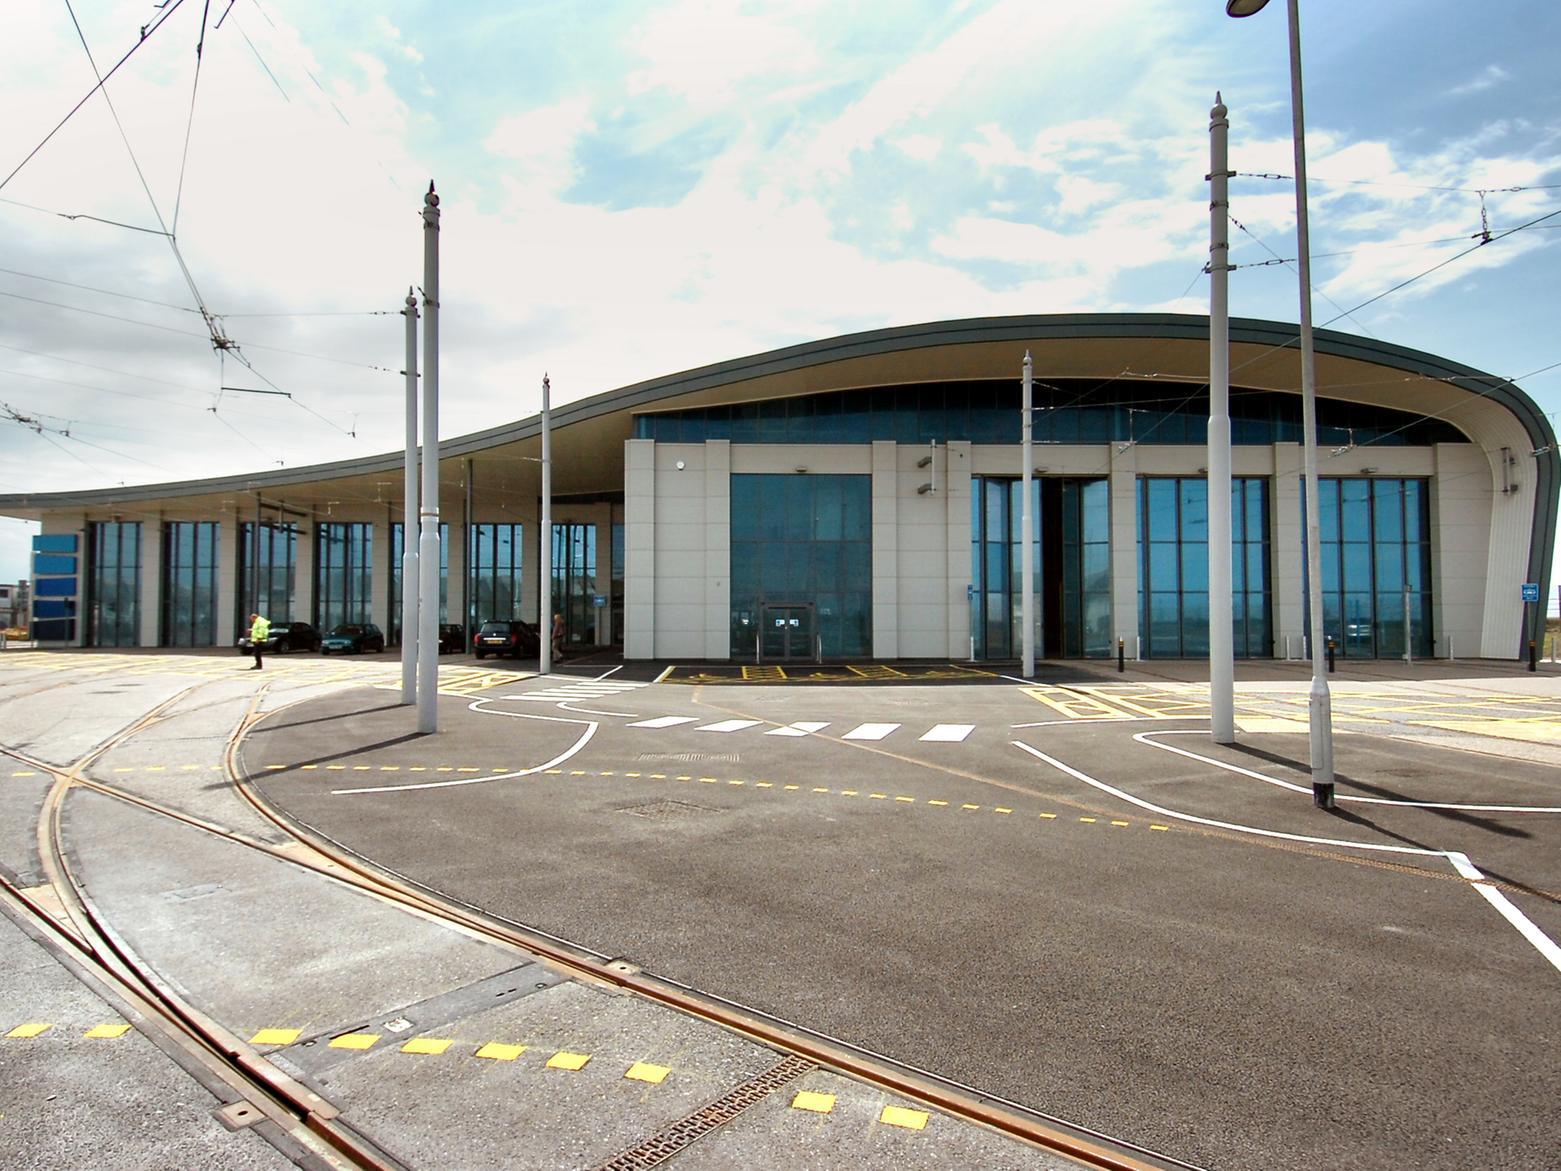 The tramway re-opened in 2012 following a 100m investment including replacement of the track, construction of a new tram depot at Squires Gate and the delivery of 16 Flexity2 trams.